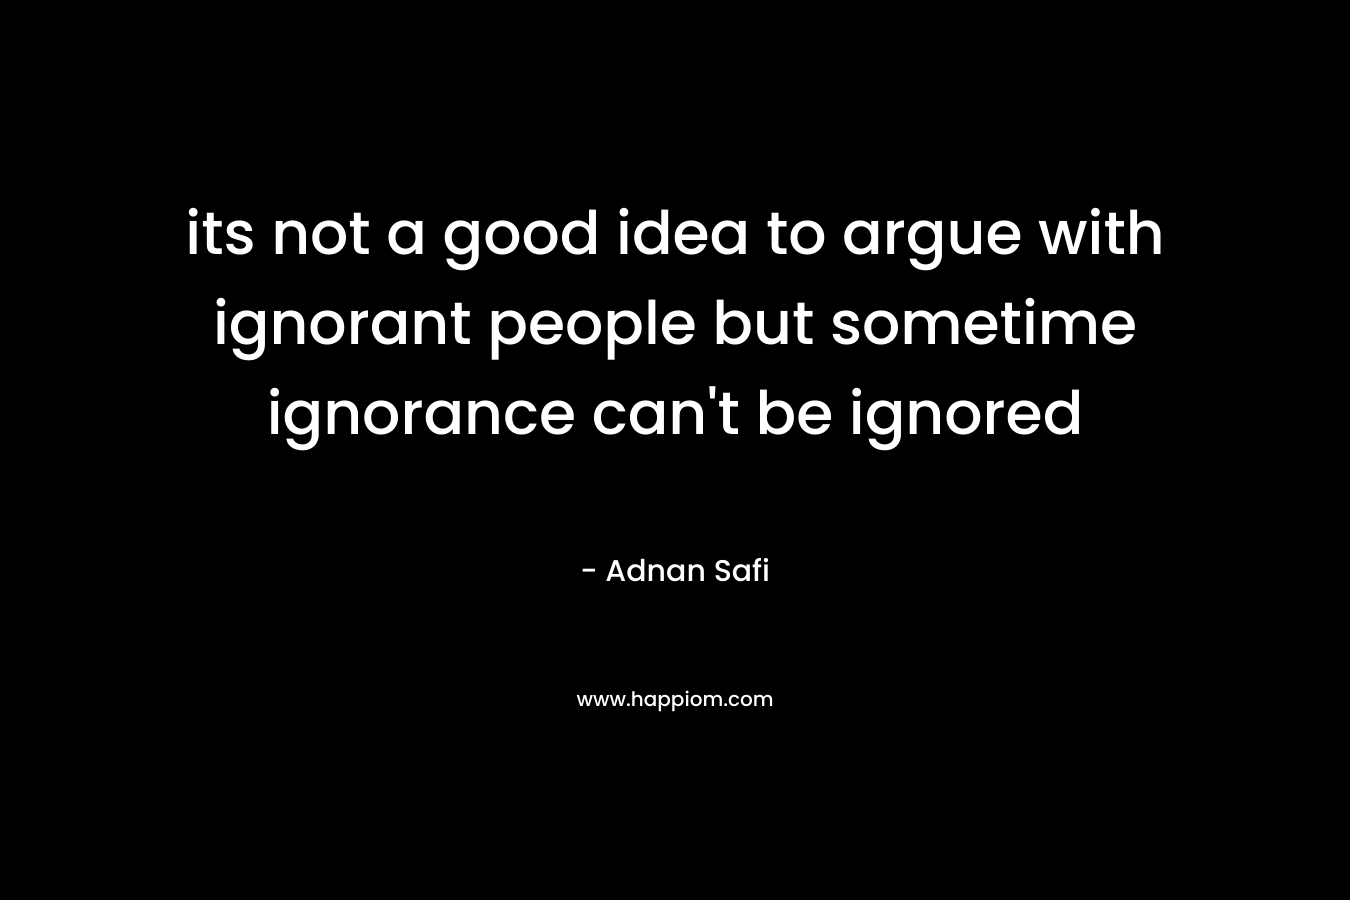 its not a good idea to argue with ignorant people but sometime ignorance can’t be ignored – Adnan Safi